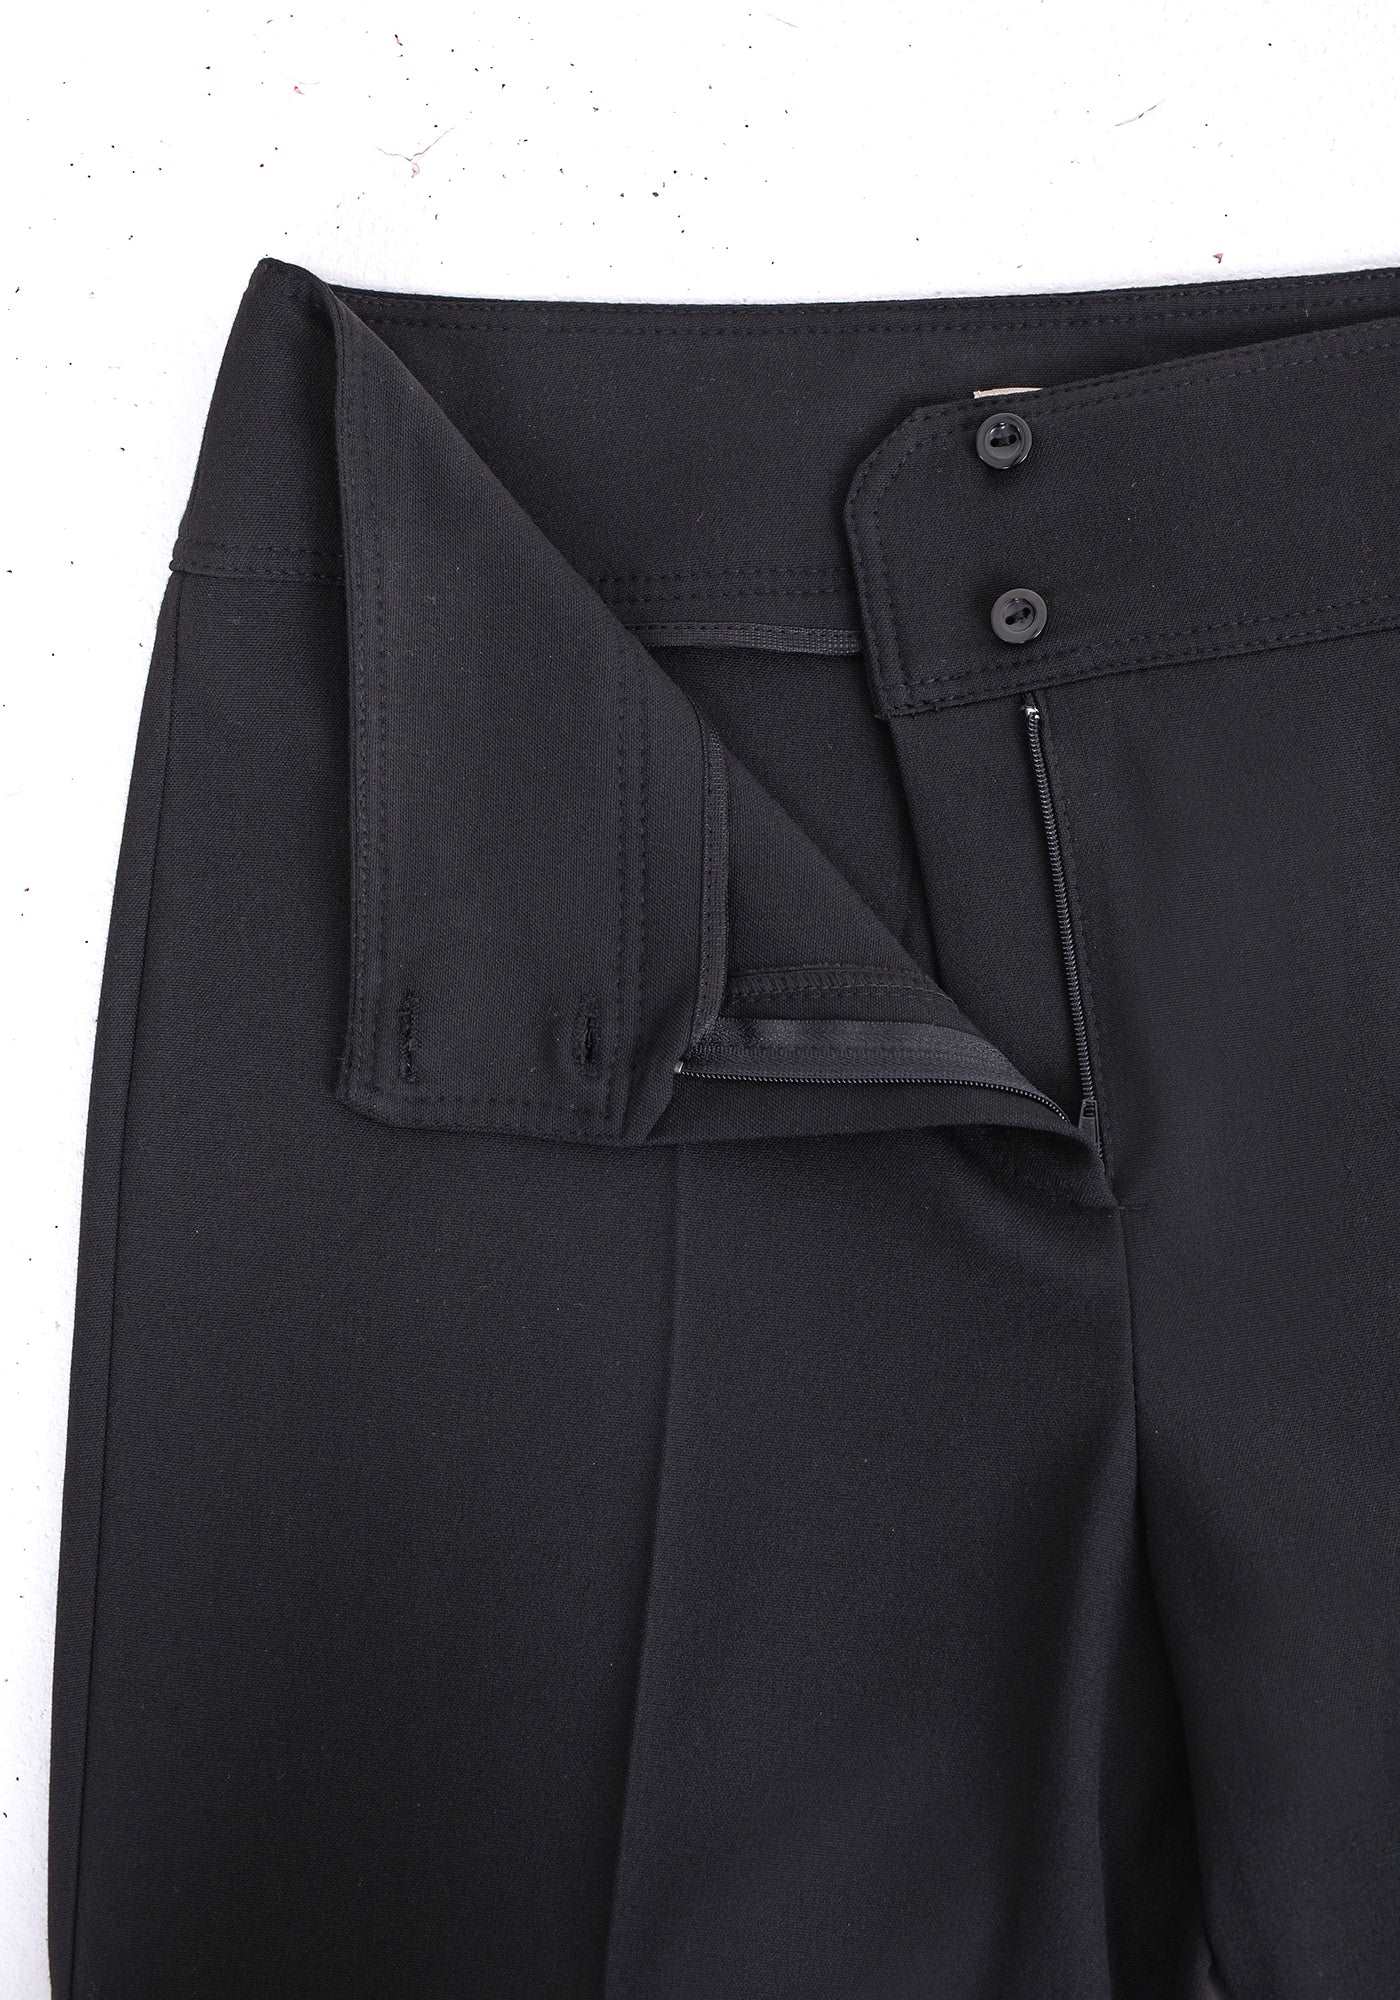 Black Straight Leg Fit All Day Comfortable Dress Pants G-Line